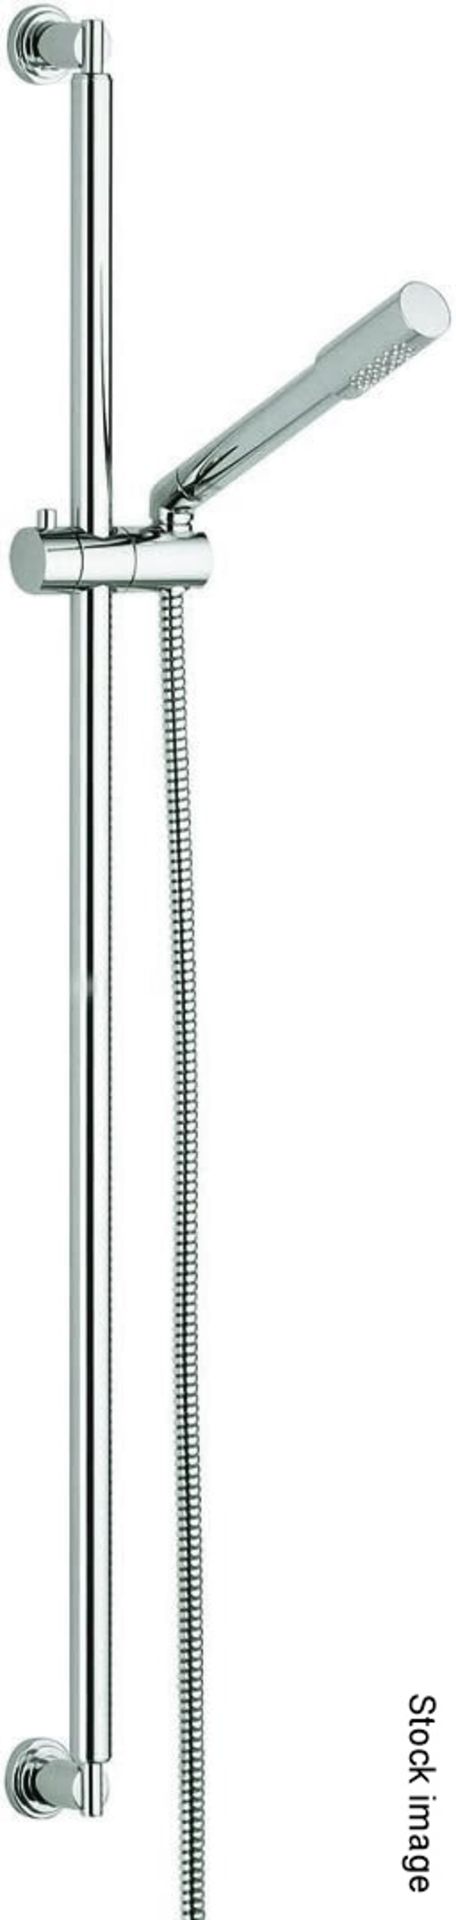 1 x GROHE 'Sena' Shower Set 900mm - Ref: 28347 - New & Boxed Stock - RRP £308.00 - CL406 - Location: - Image 2 of 3